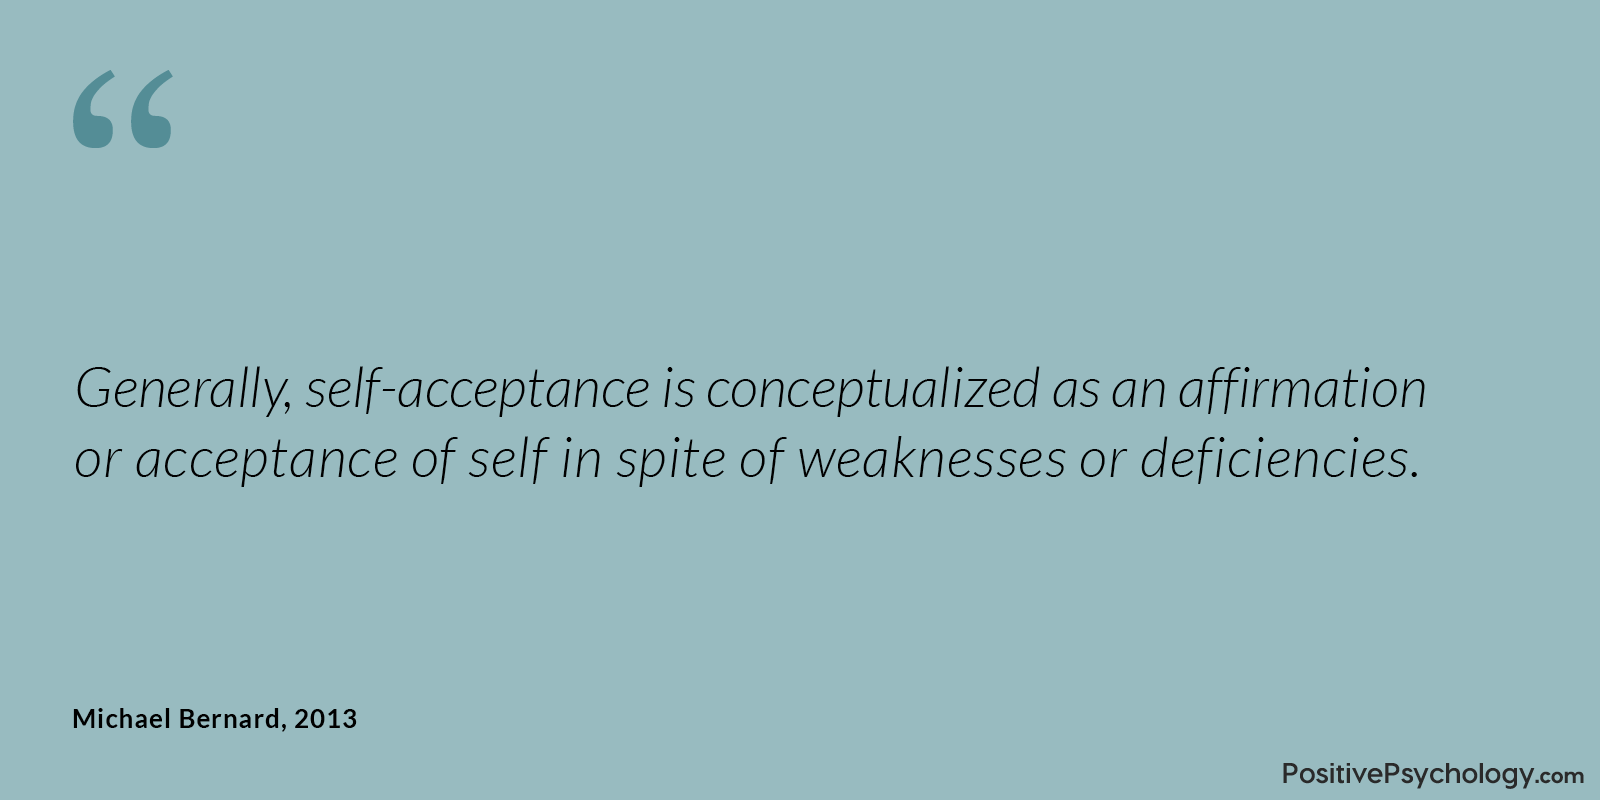 19 Self-Acceptance Quotes to Honor and Accept Yourself Fully